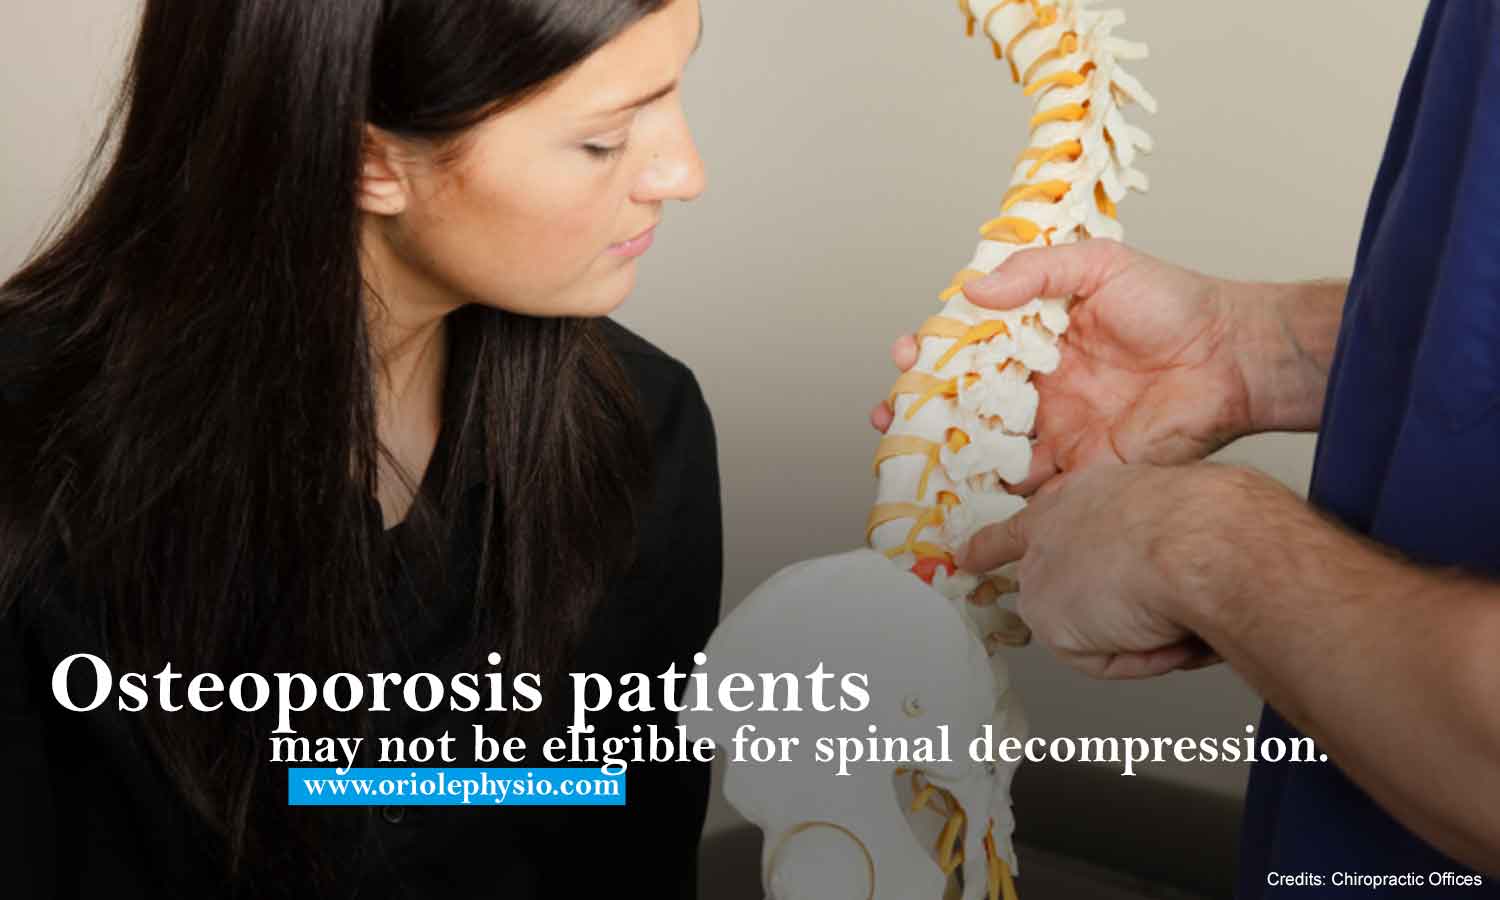 Osteoporosis-patients-may-not-be-eligible-for-spinal-decompression